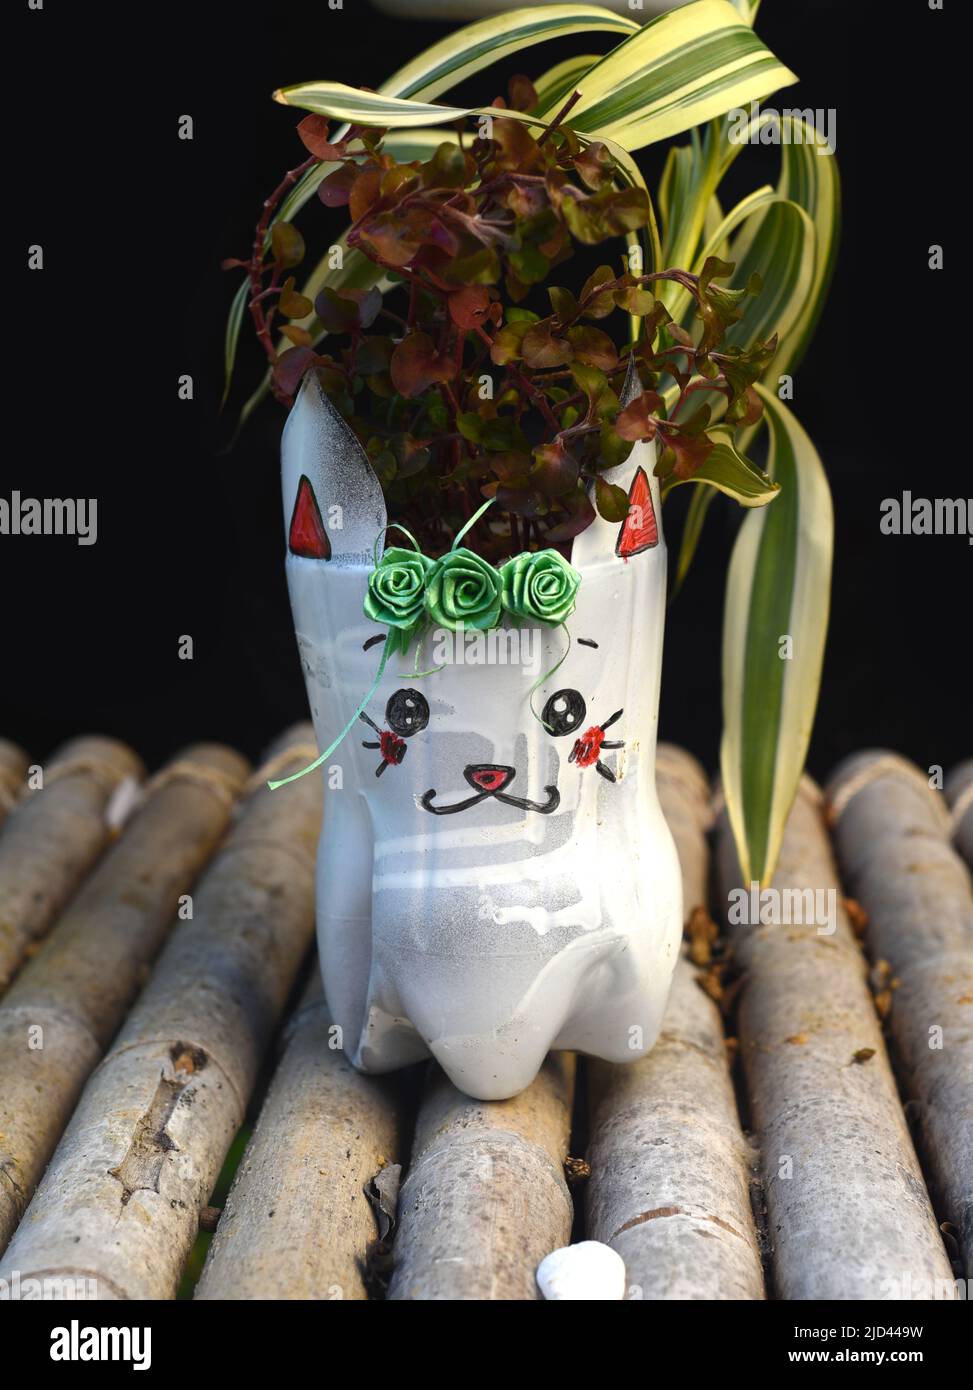 Vase made of plastic bottle with potted plant Stock Photo